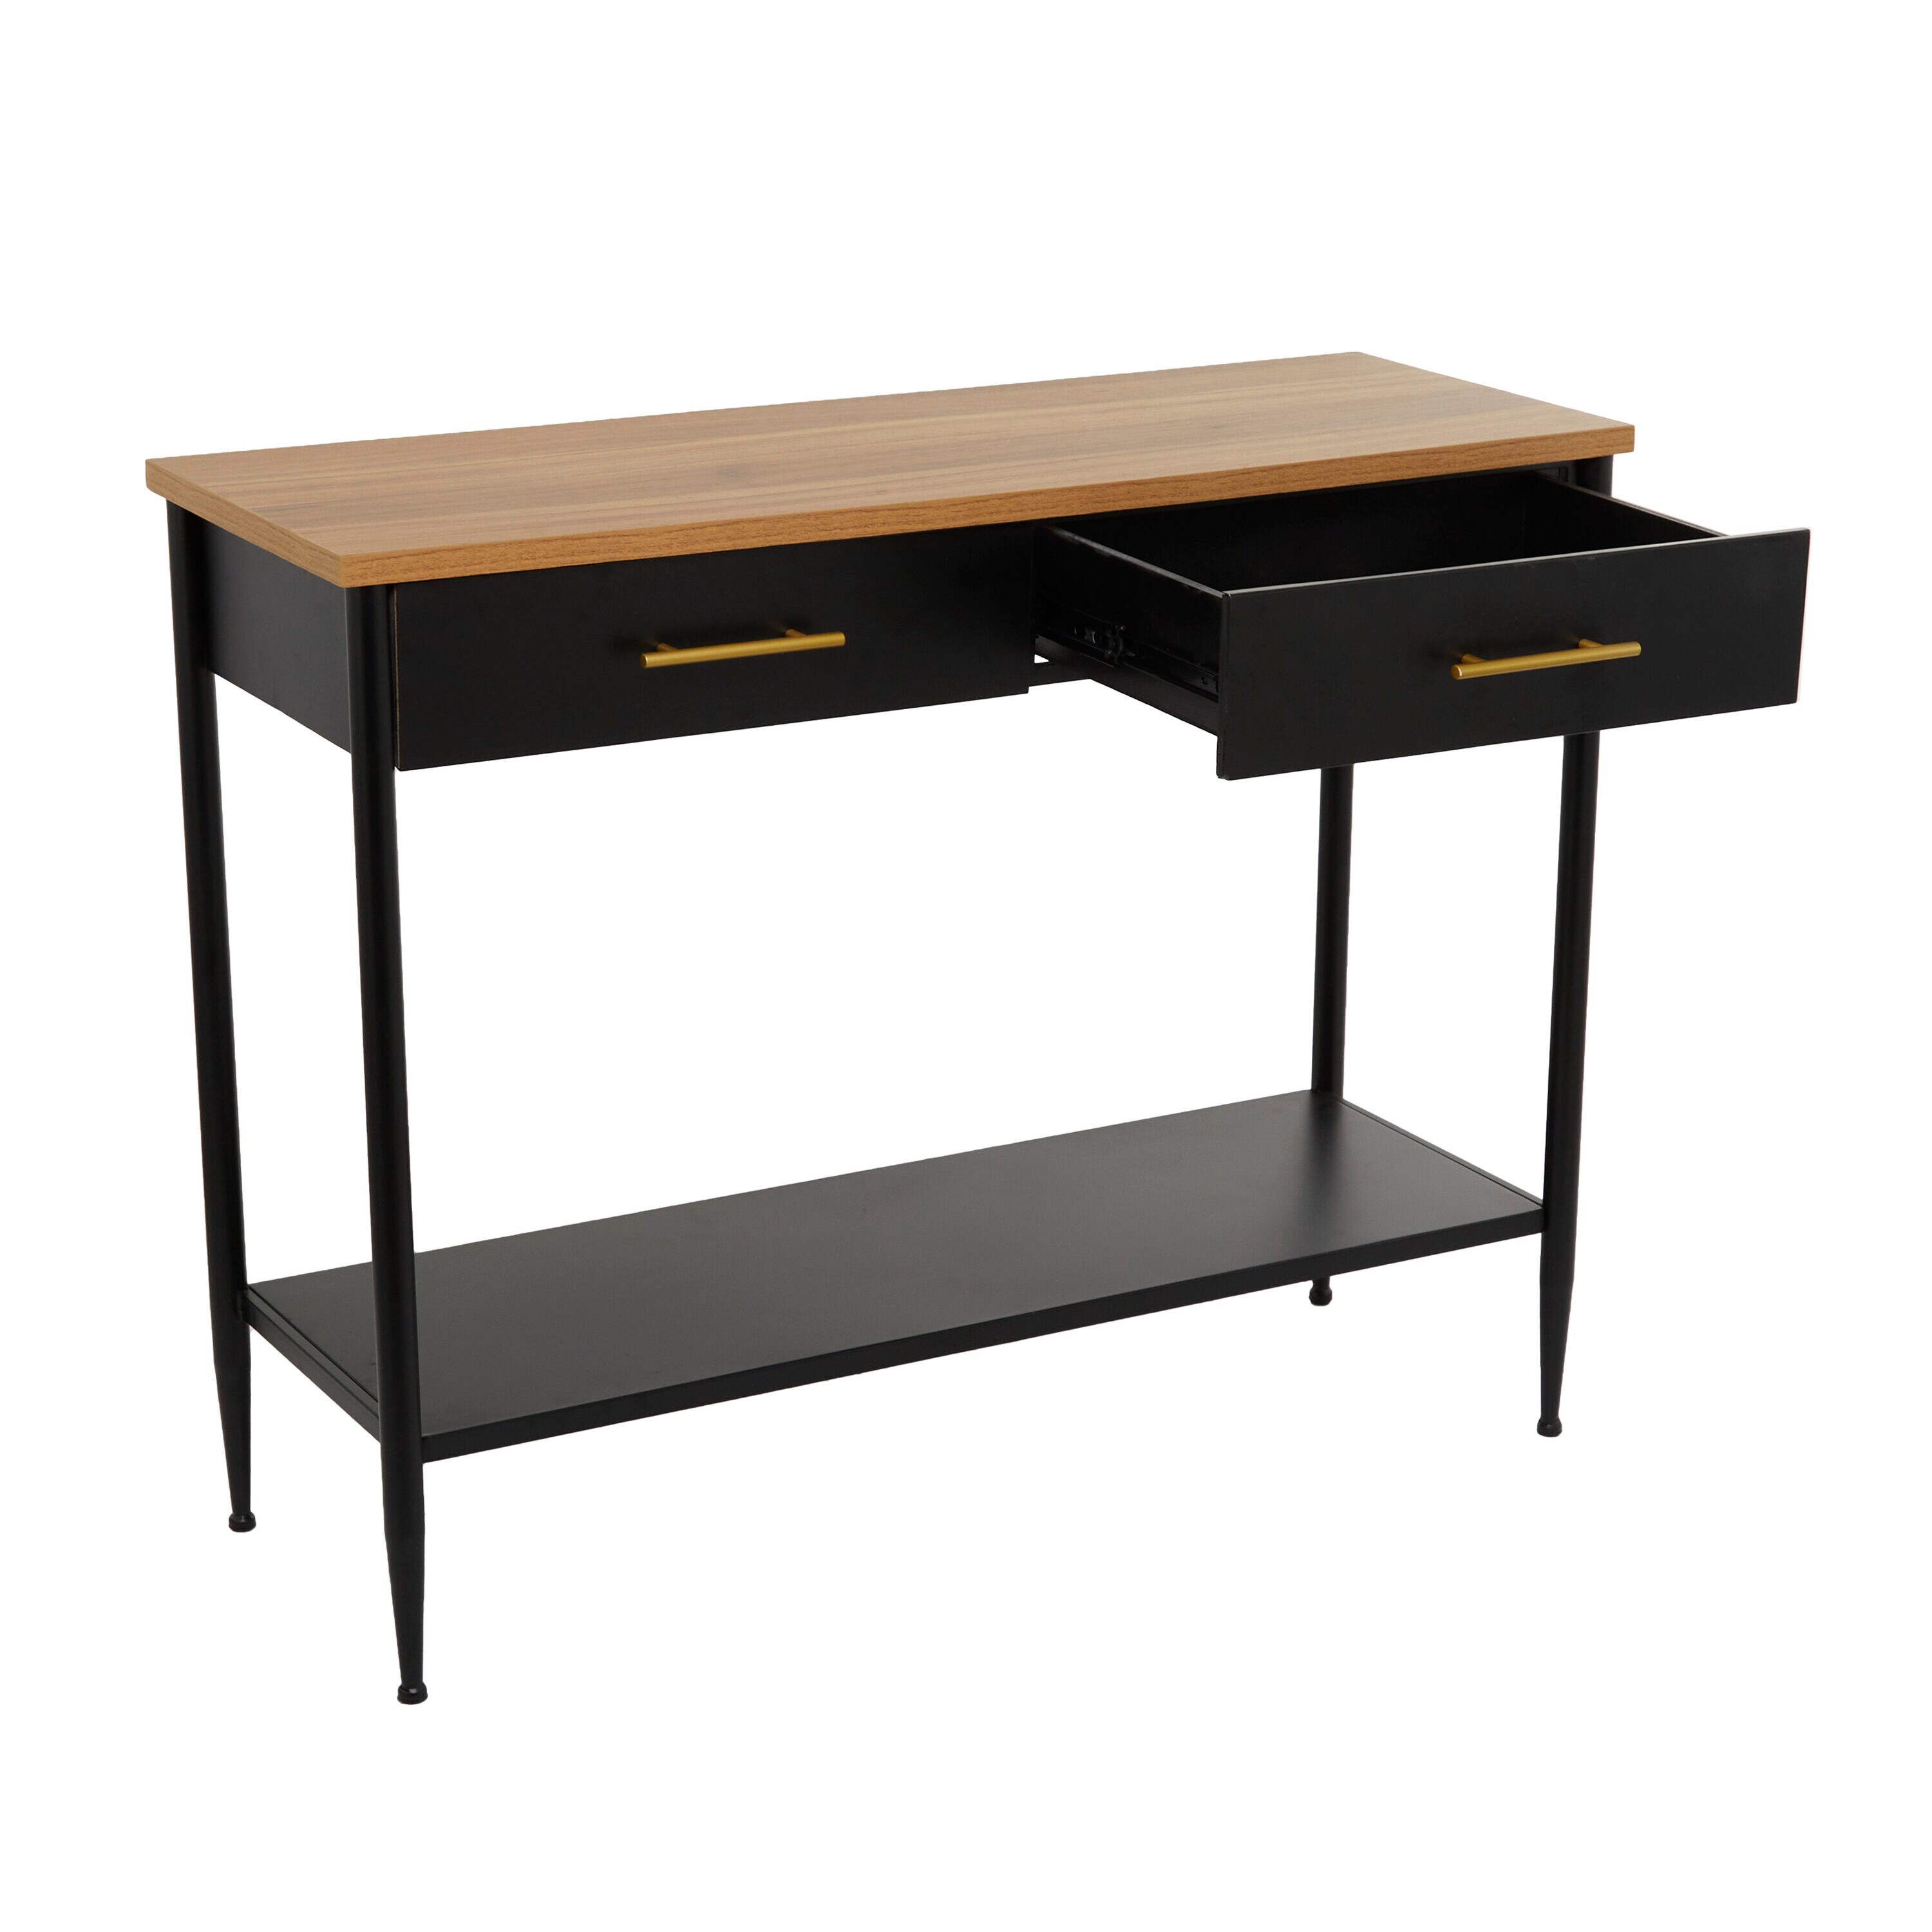 2 Cabinet 1 Drawer Console Table Black Leg & Wooden Drawers and